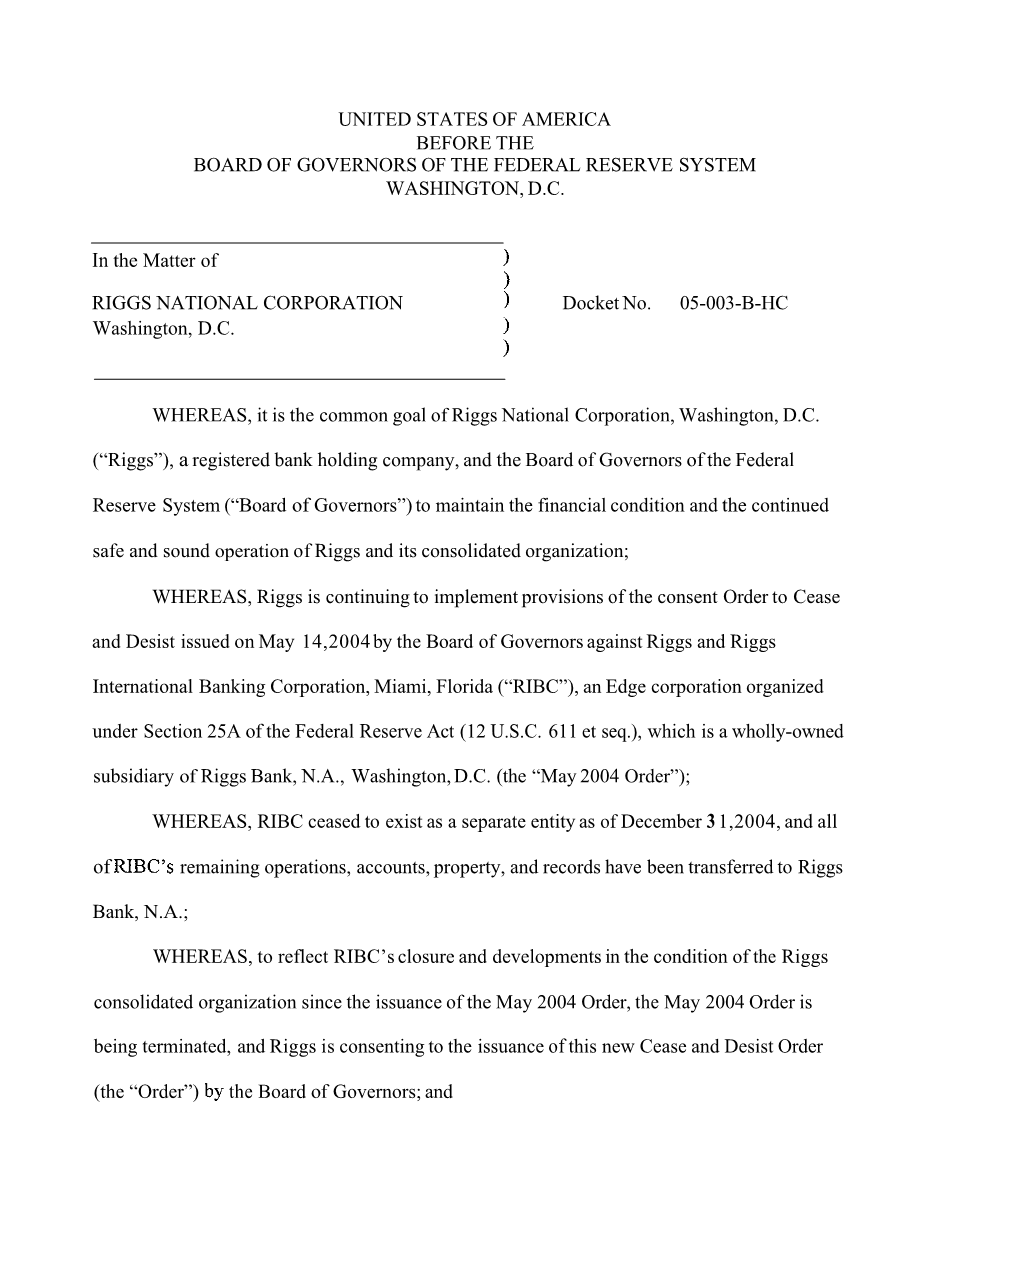 Consent Order to Cease and Desist Against Riggs National Corp. and Riggs International Banking Corp.--January 27, 2005